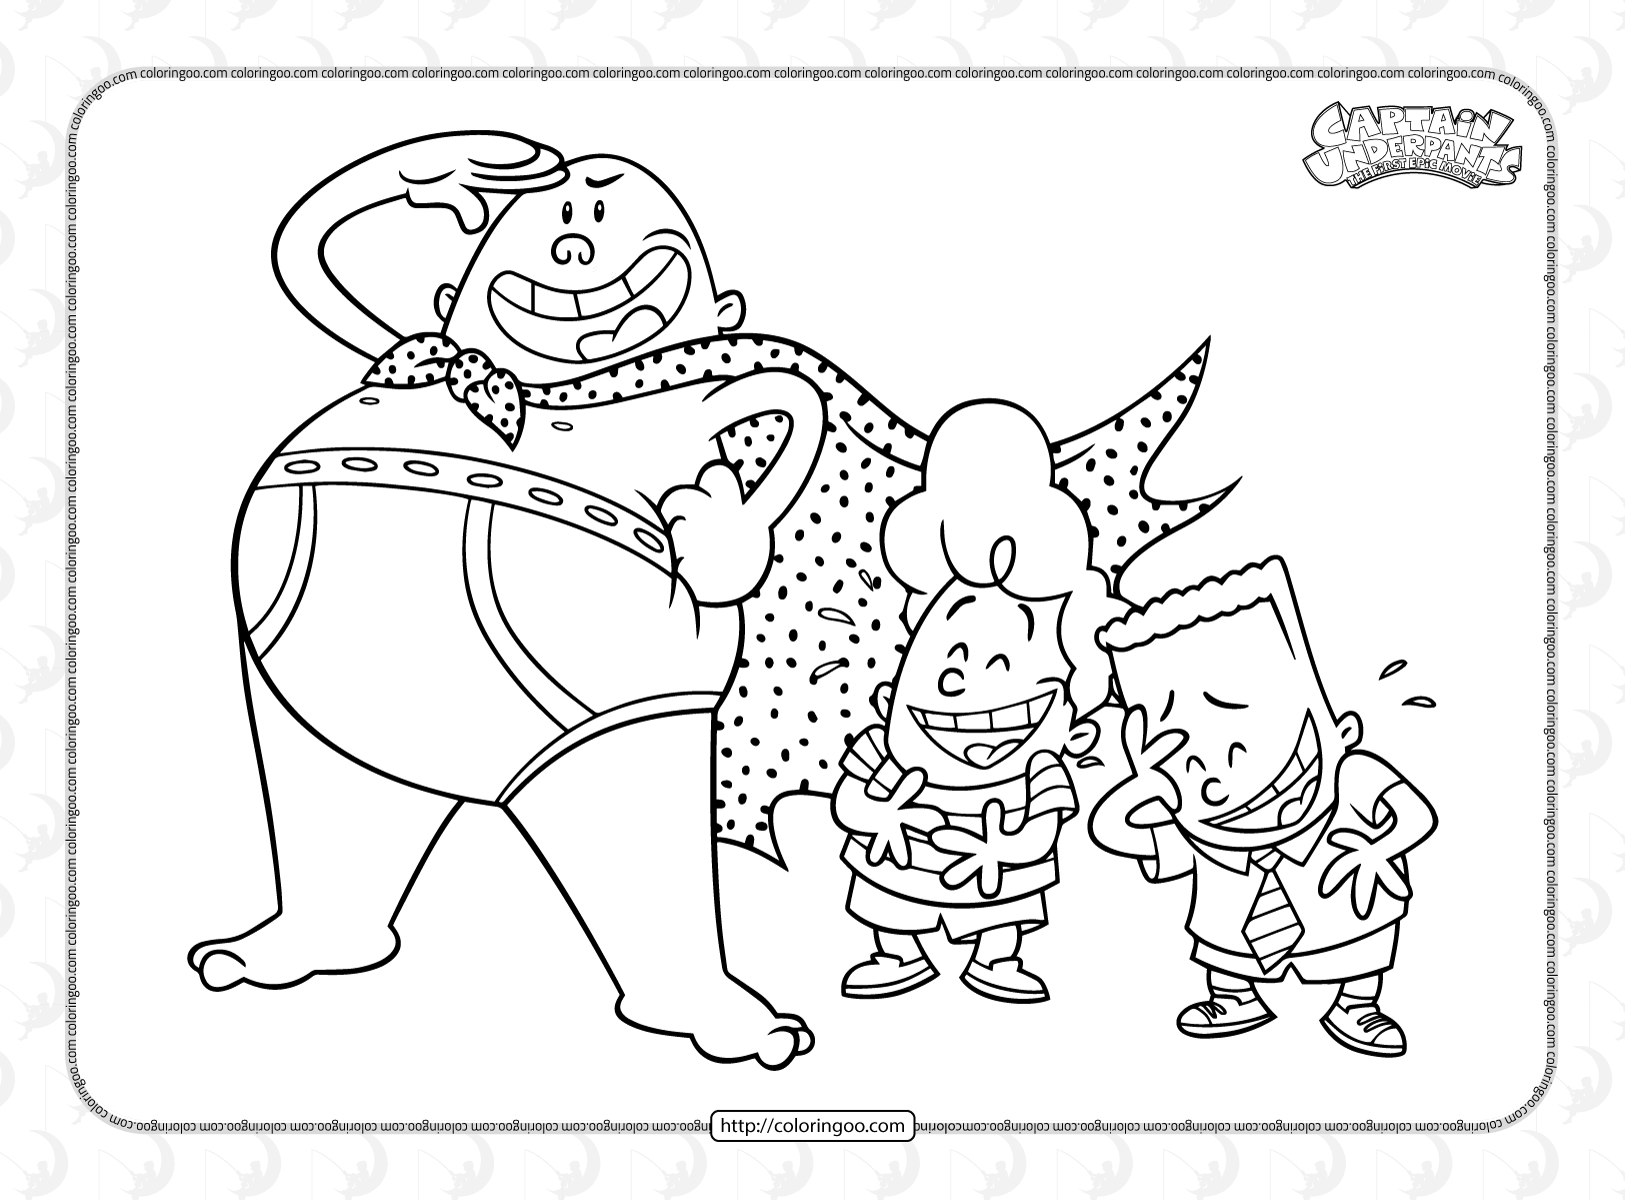 captain underpants harold and george coloring page